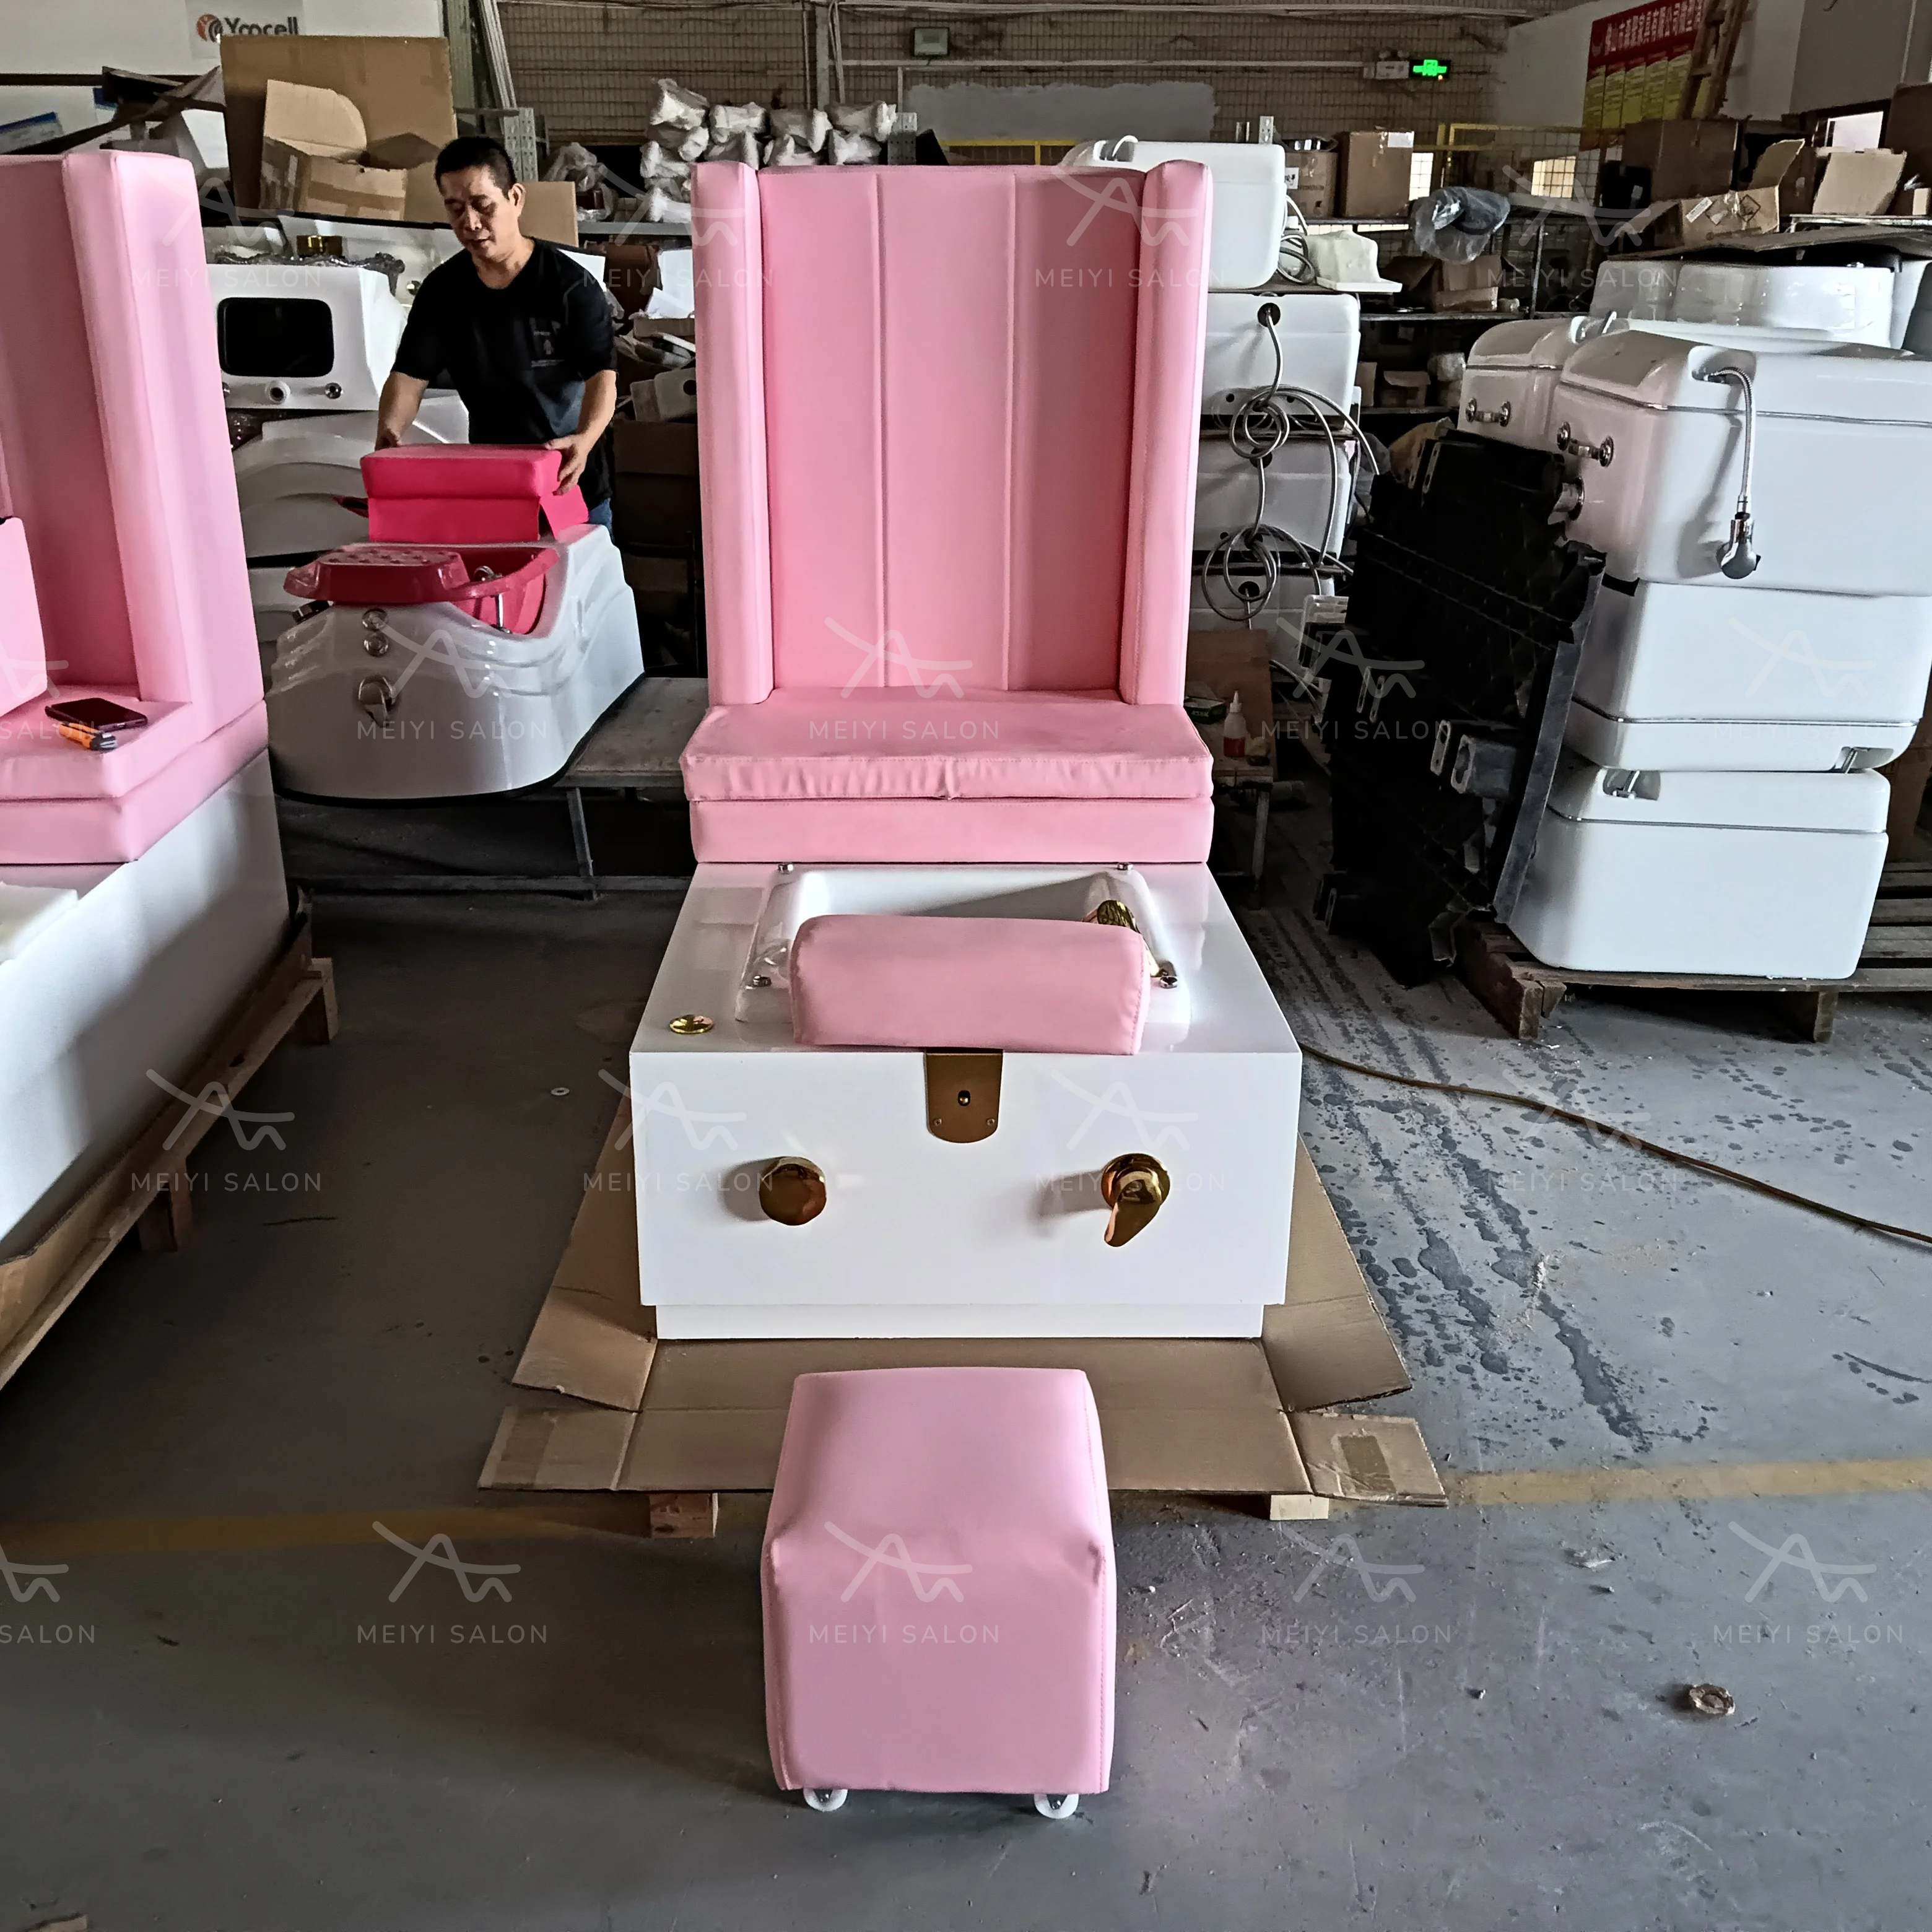 Pedicure Chair With Bowl And Stools 4